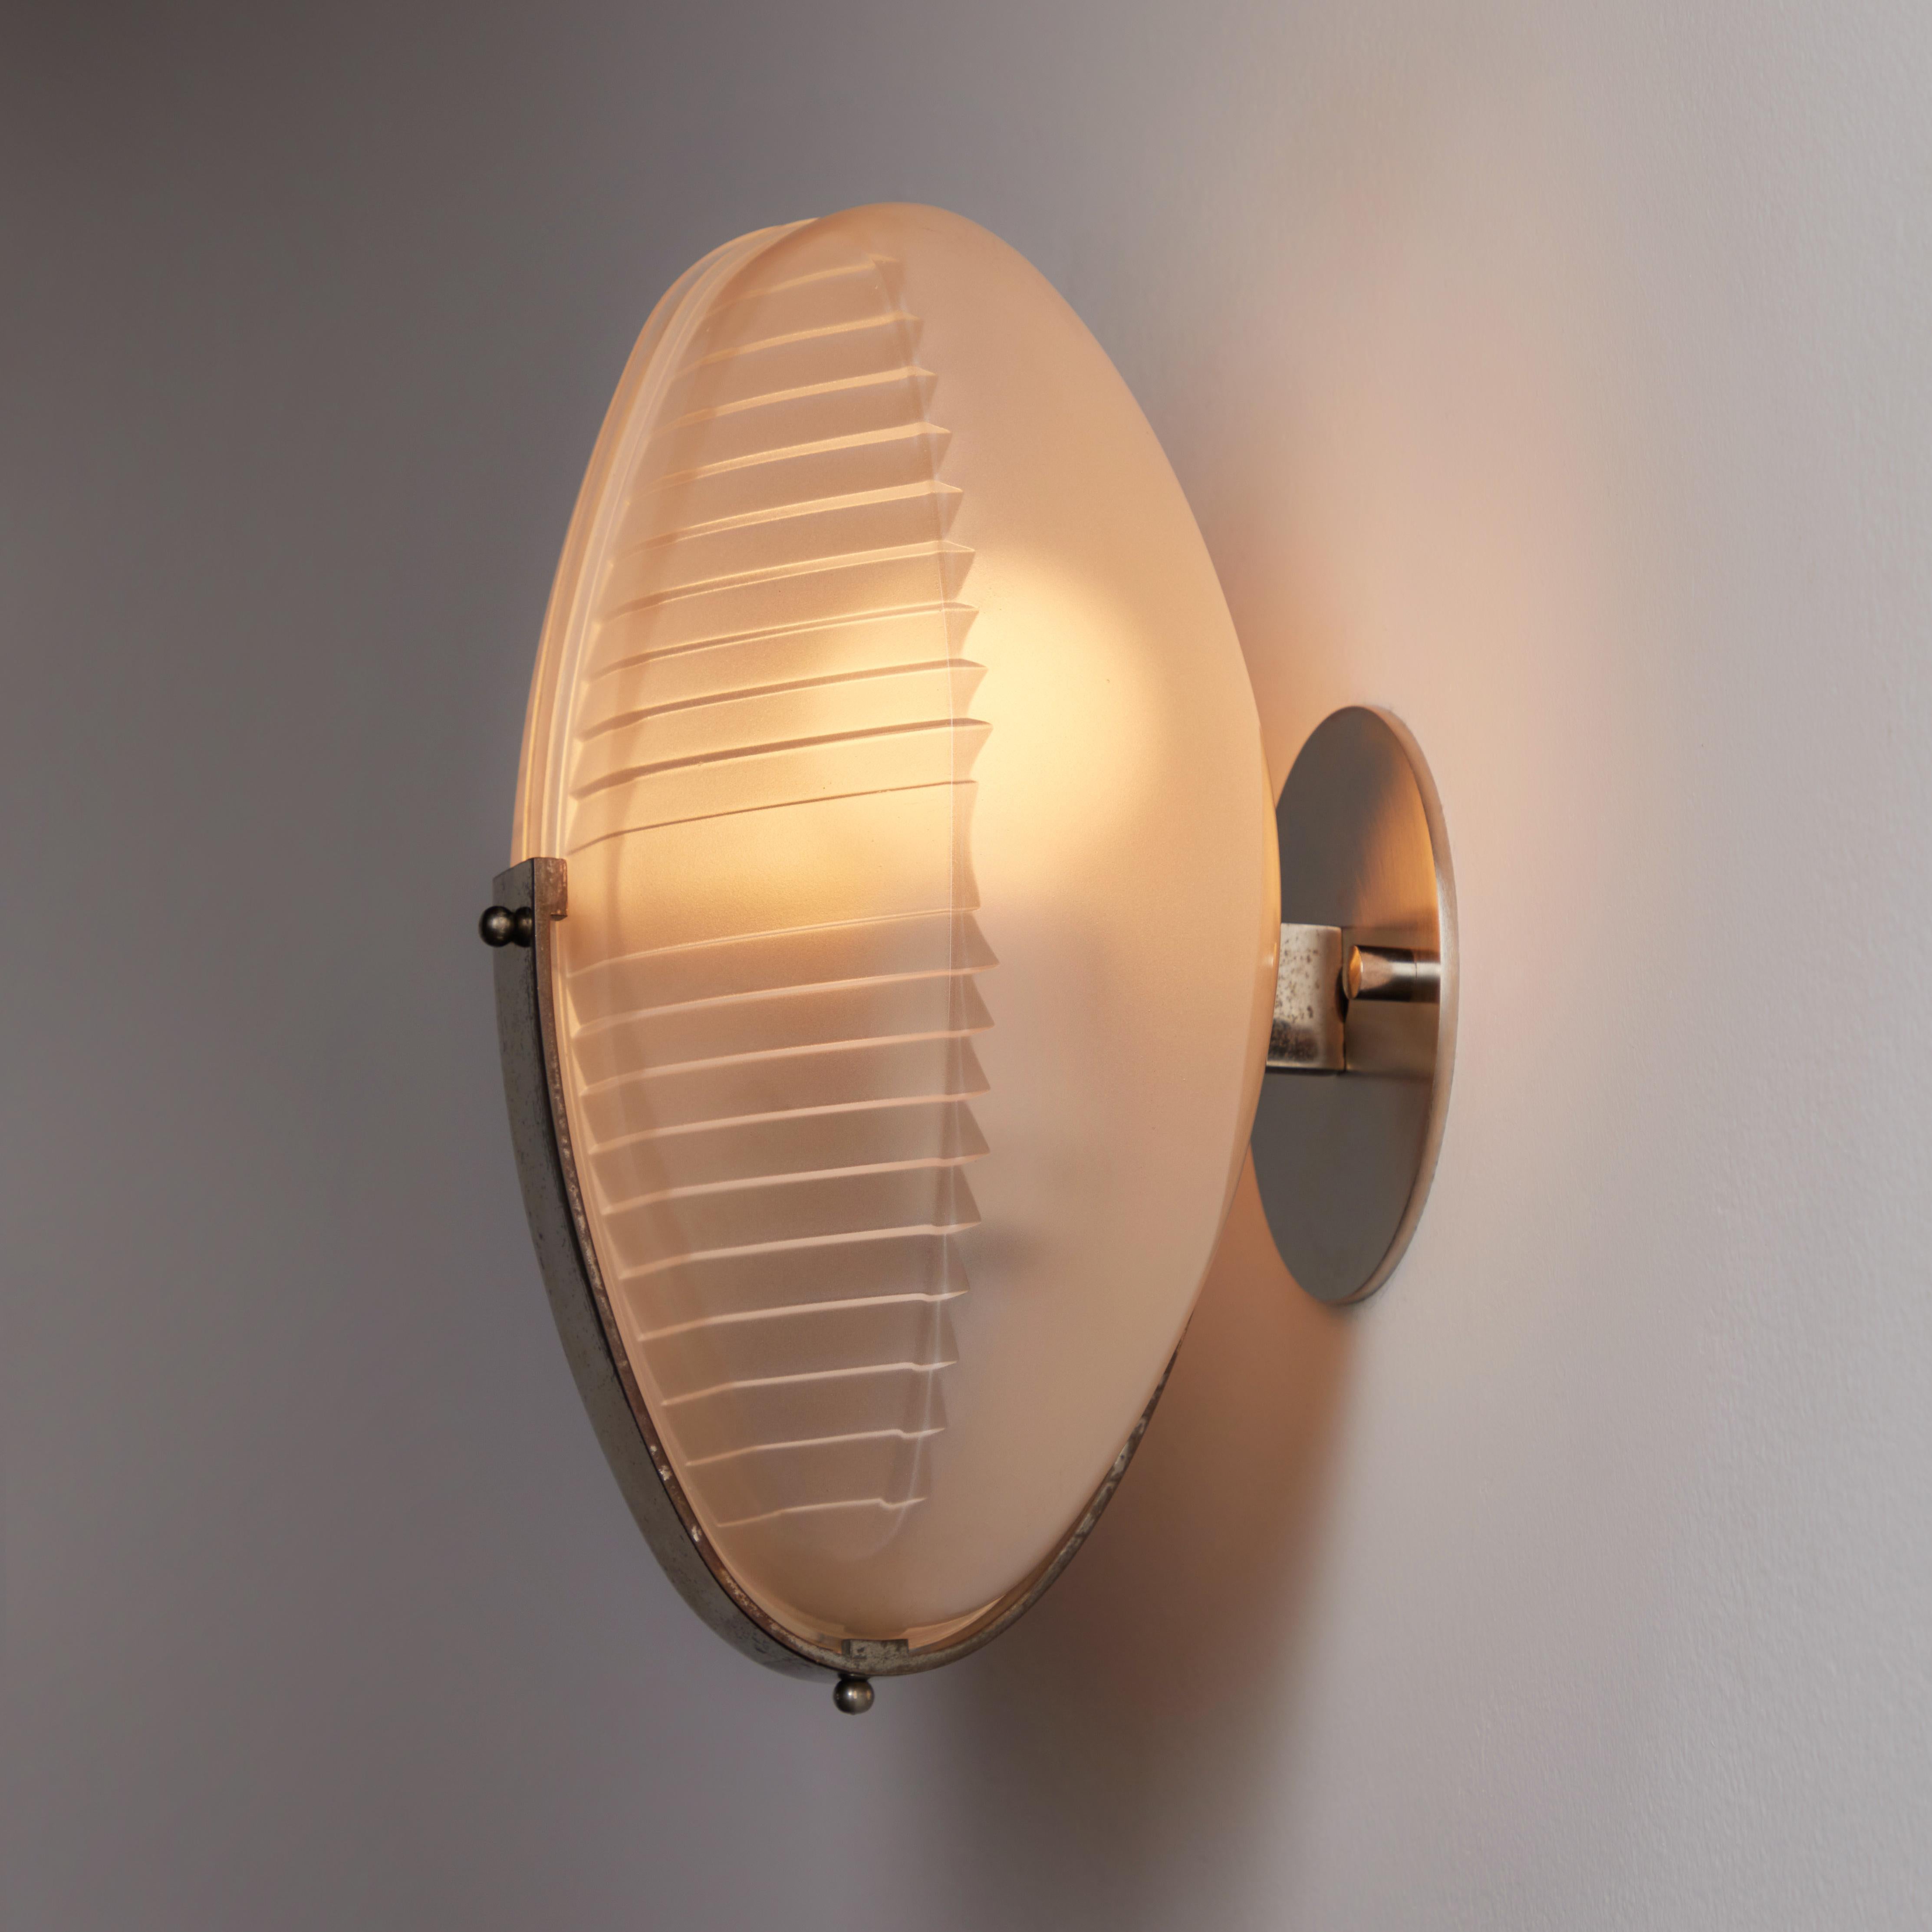 Polished Pairs of Lambda Sconces by Vico Magistretti for Artemide